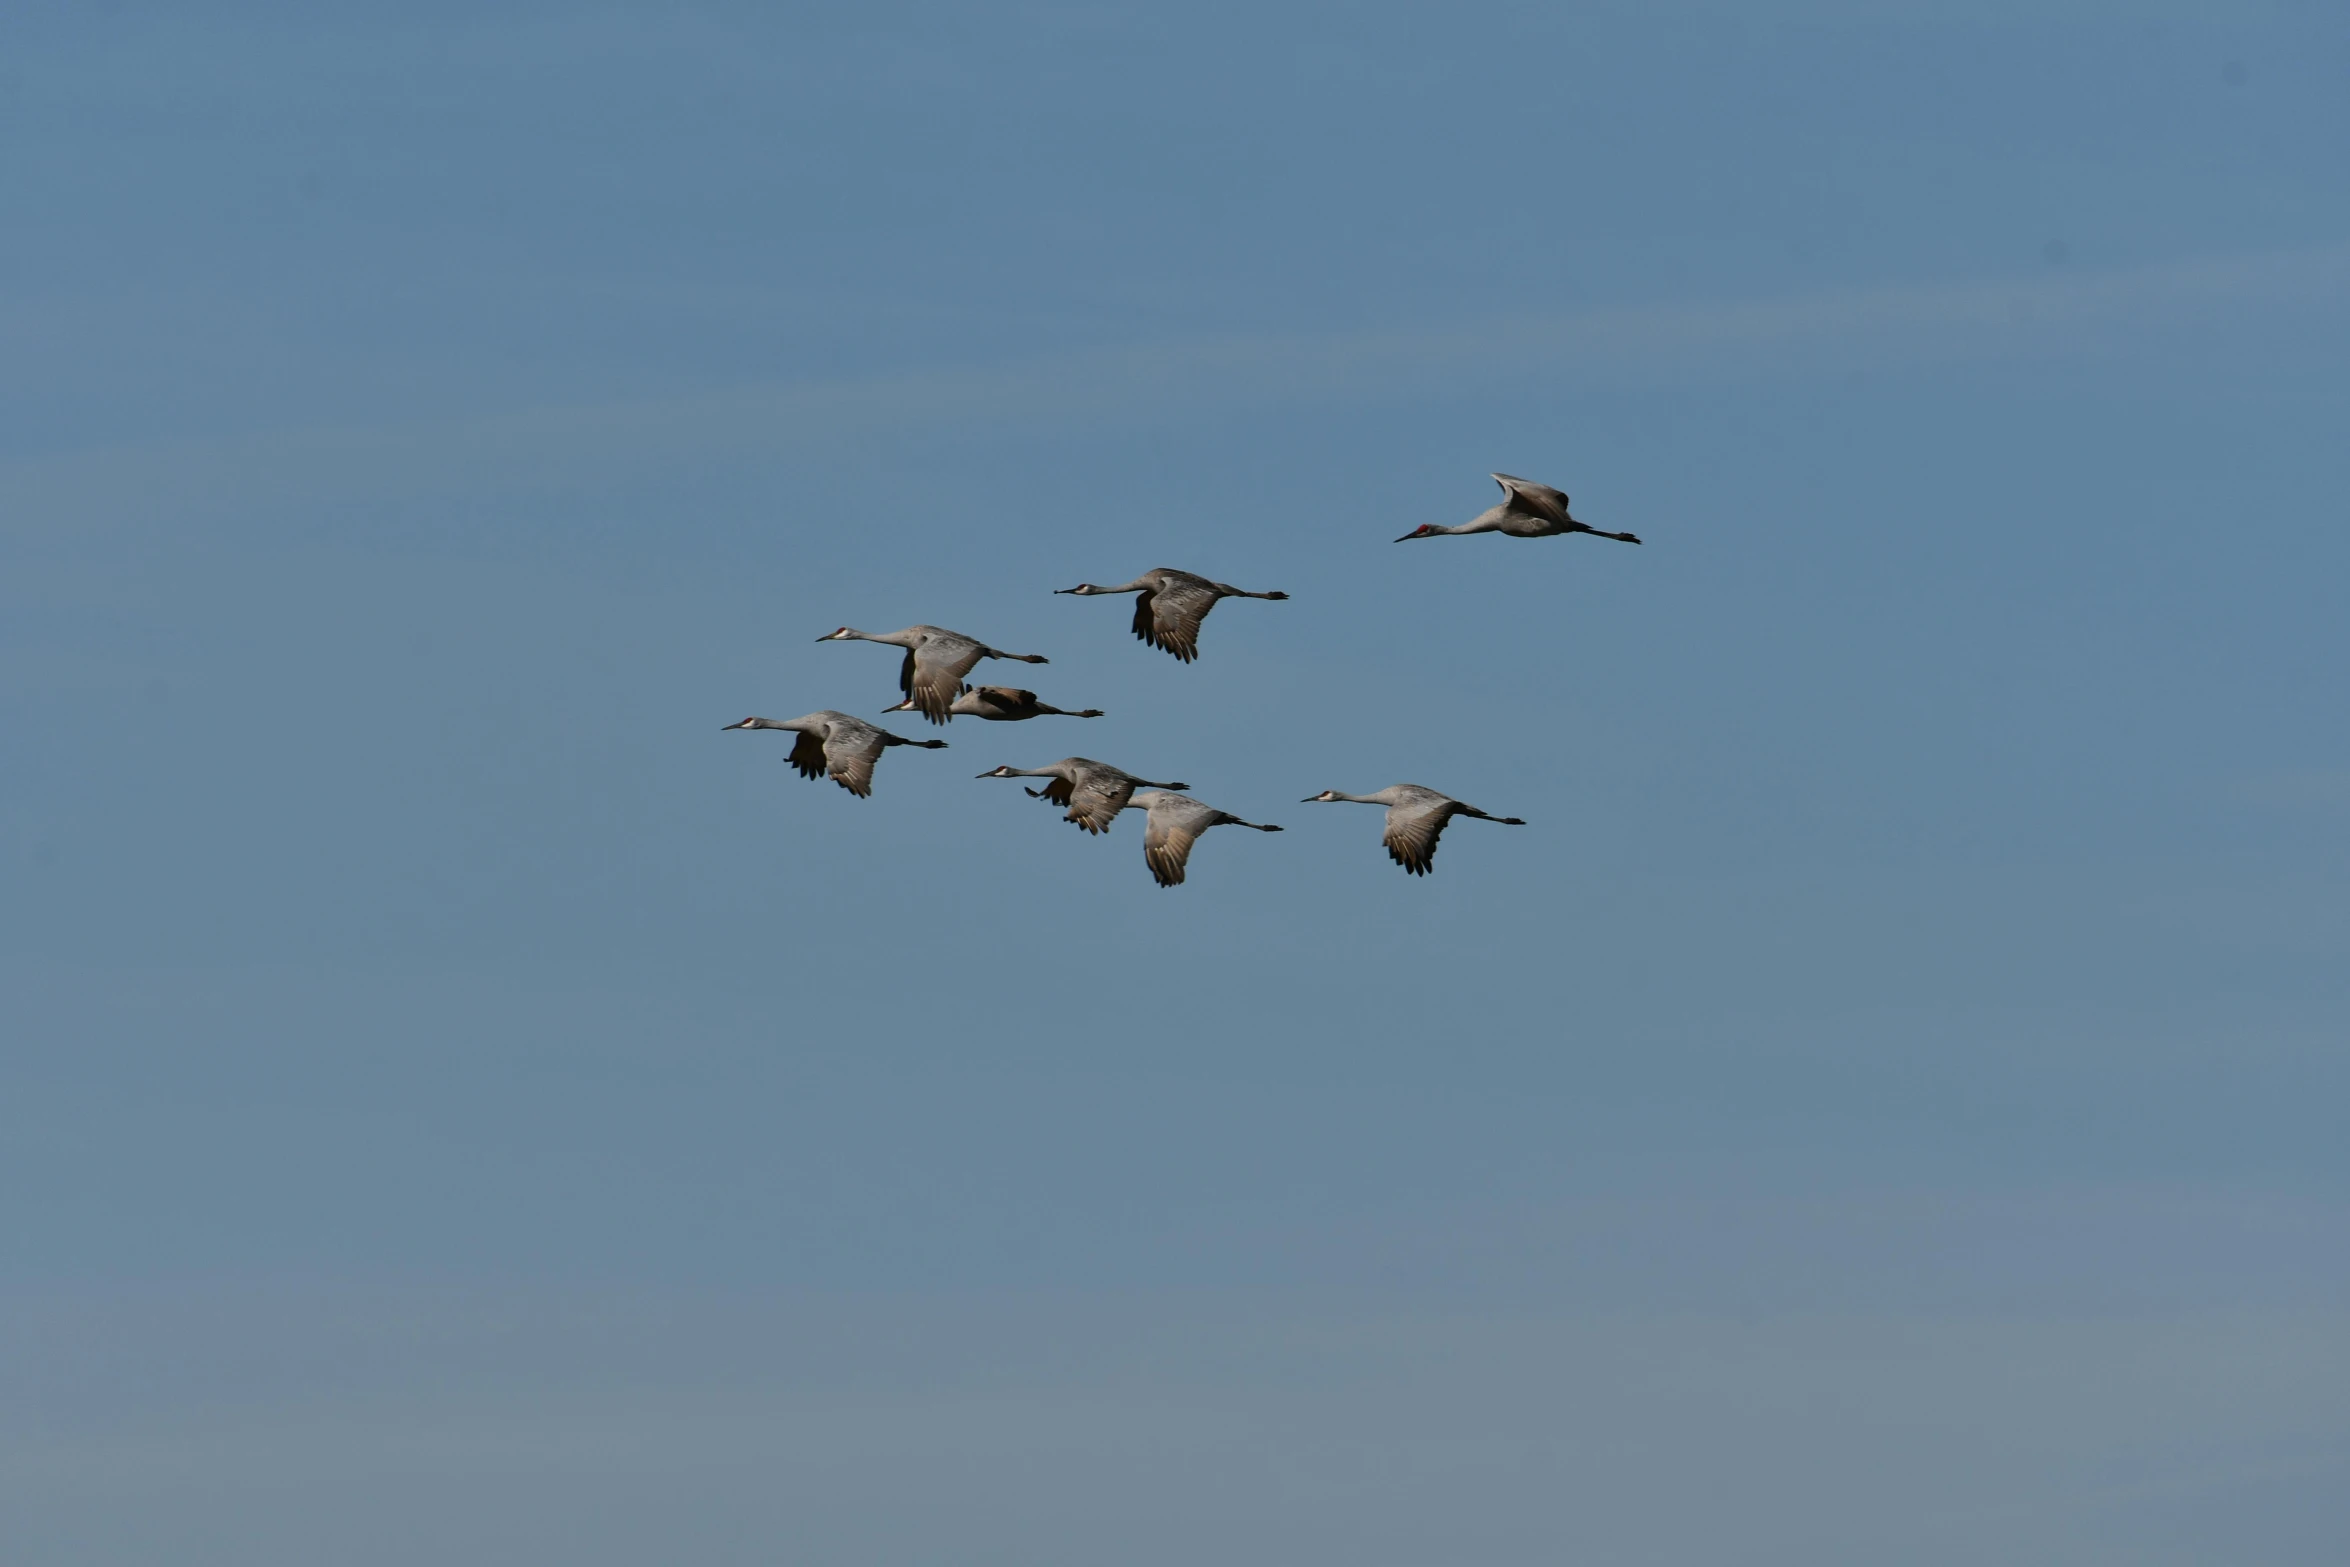 the geese fly through the blue sky together